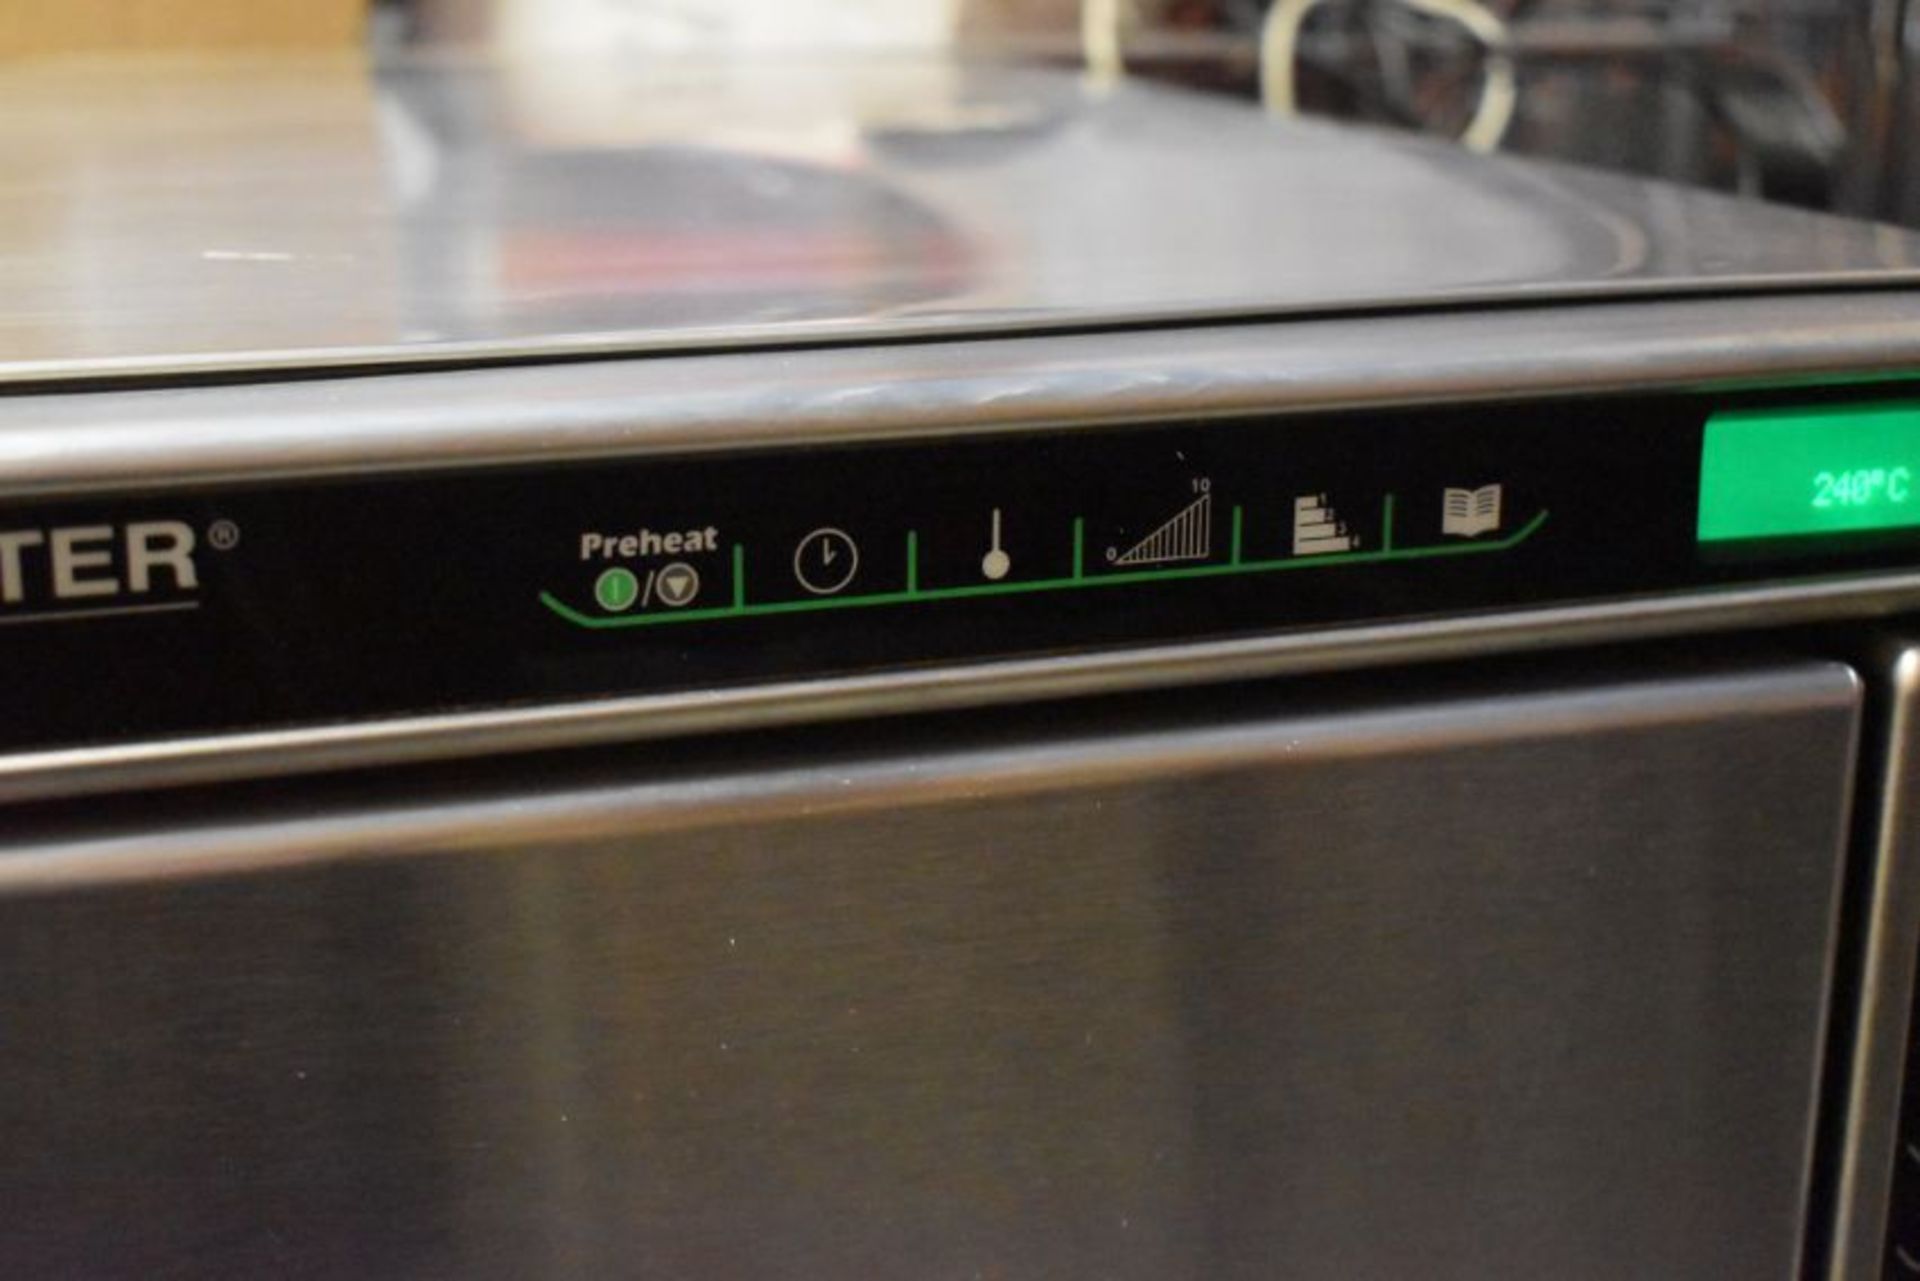 1 x Menumaster Jetwave JET514U High Speed Combination Microwave Oven - RRP £2,400 - CL232 - Ref: IN2 - Image 3 of 9